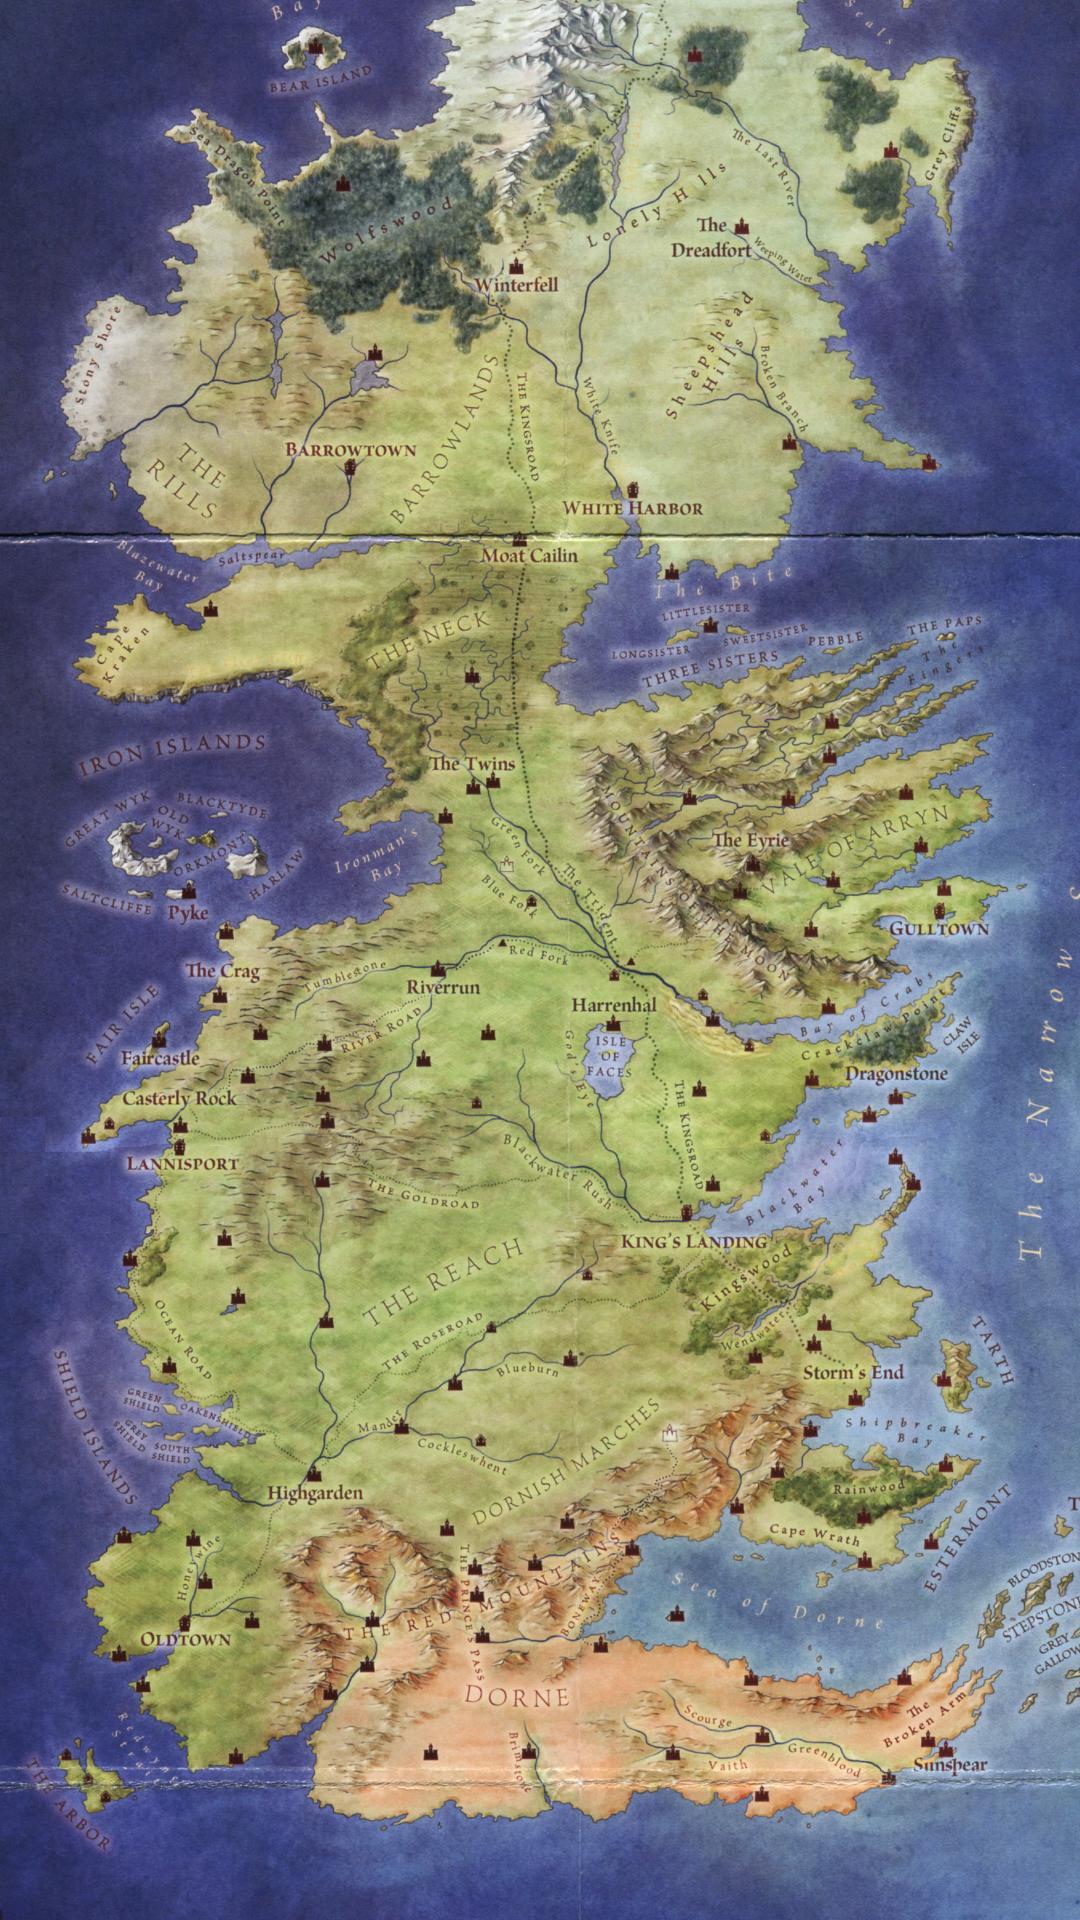 1361 game of thrones westeros map background image - Rare Gallery HD  Wallpapers